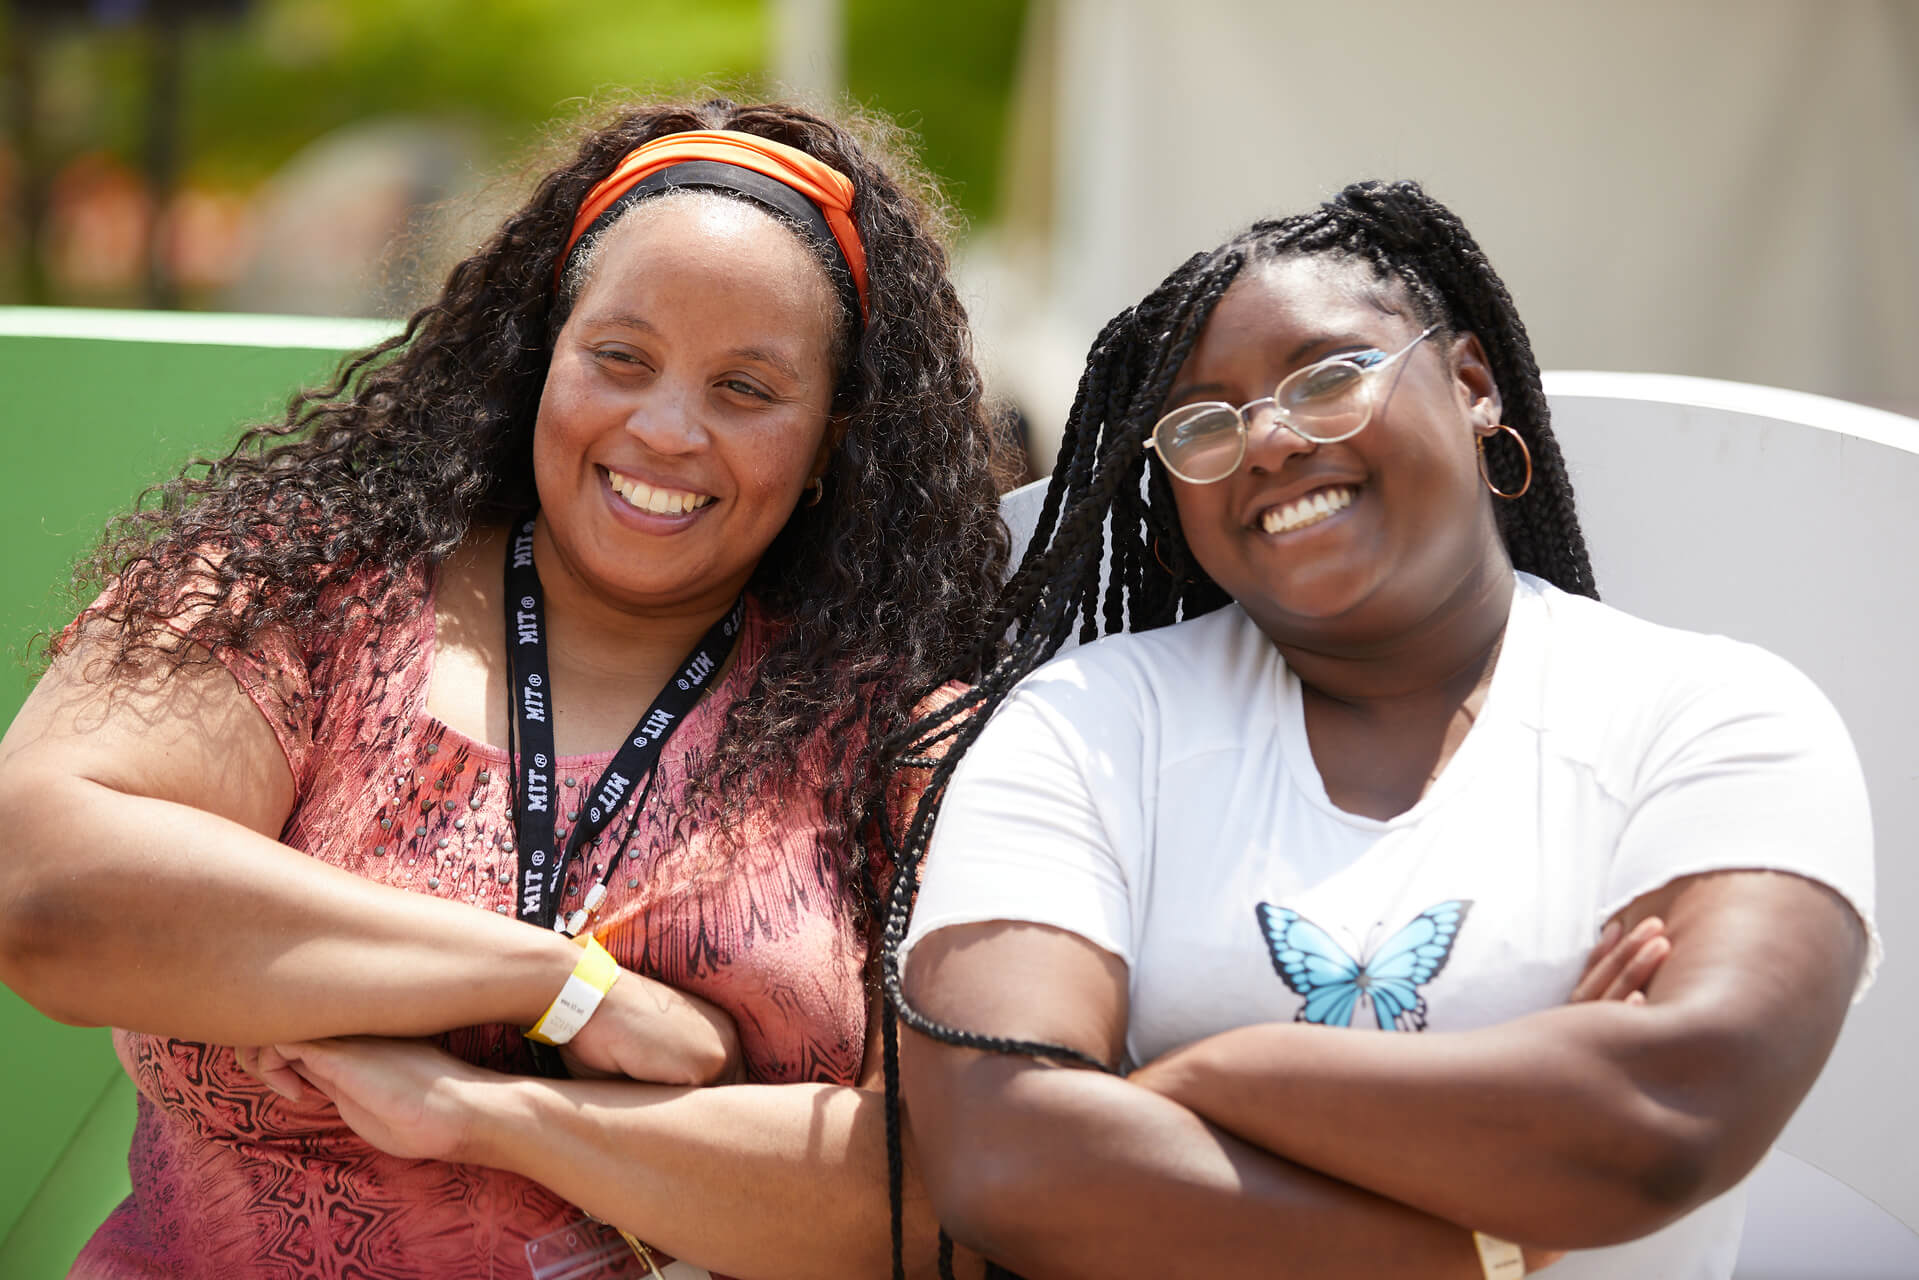 Educator Nikki Wallace smiling and posing for a picture with a female student